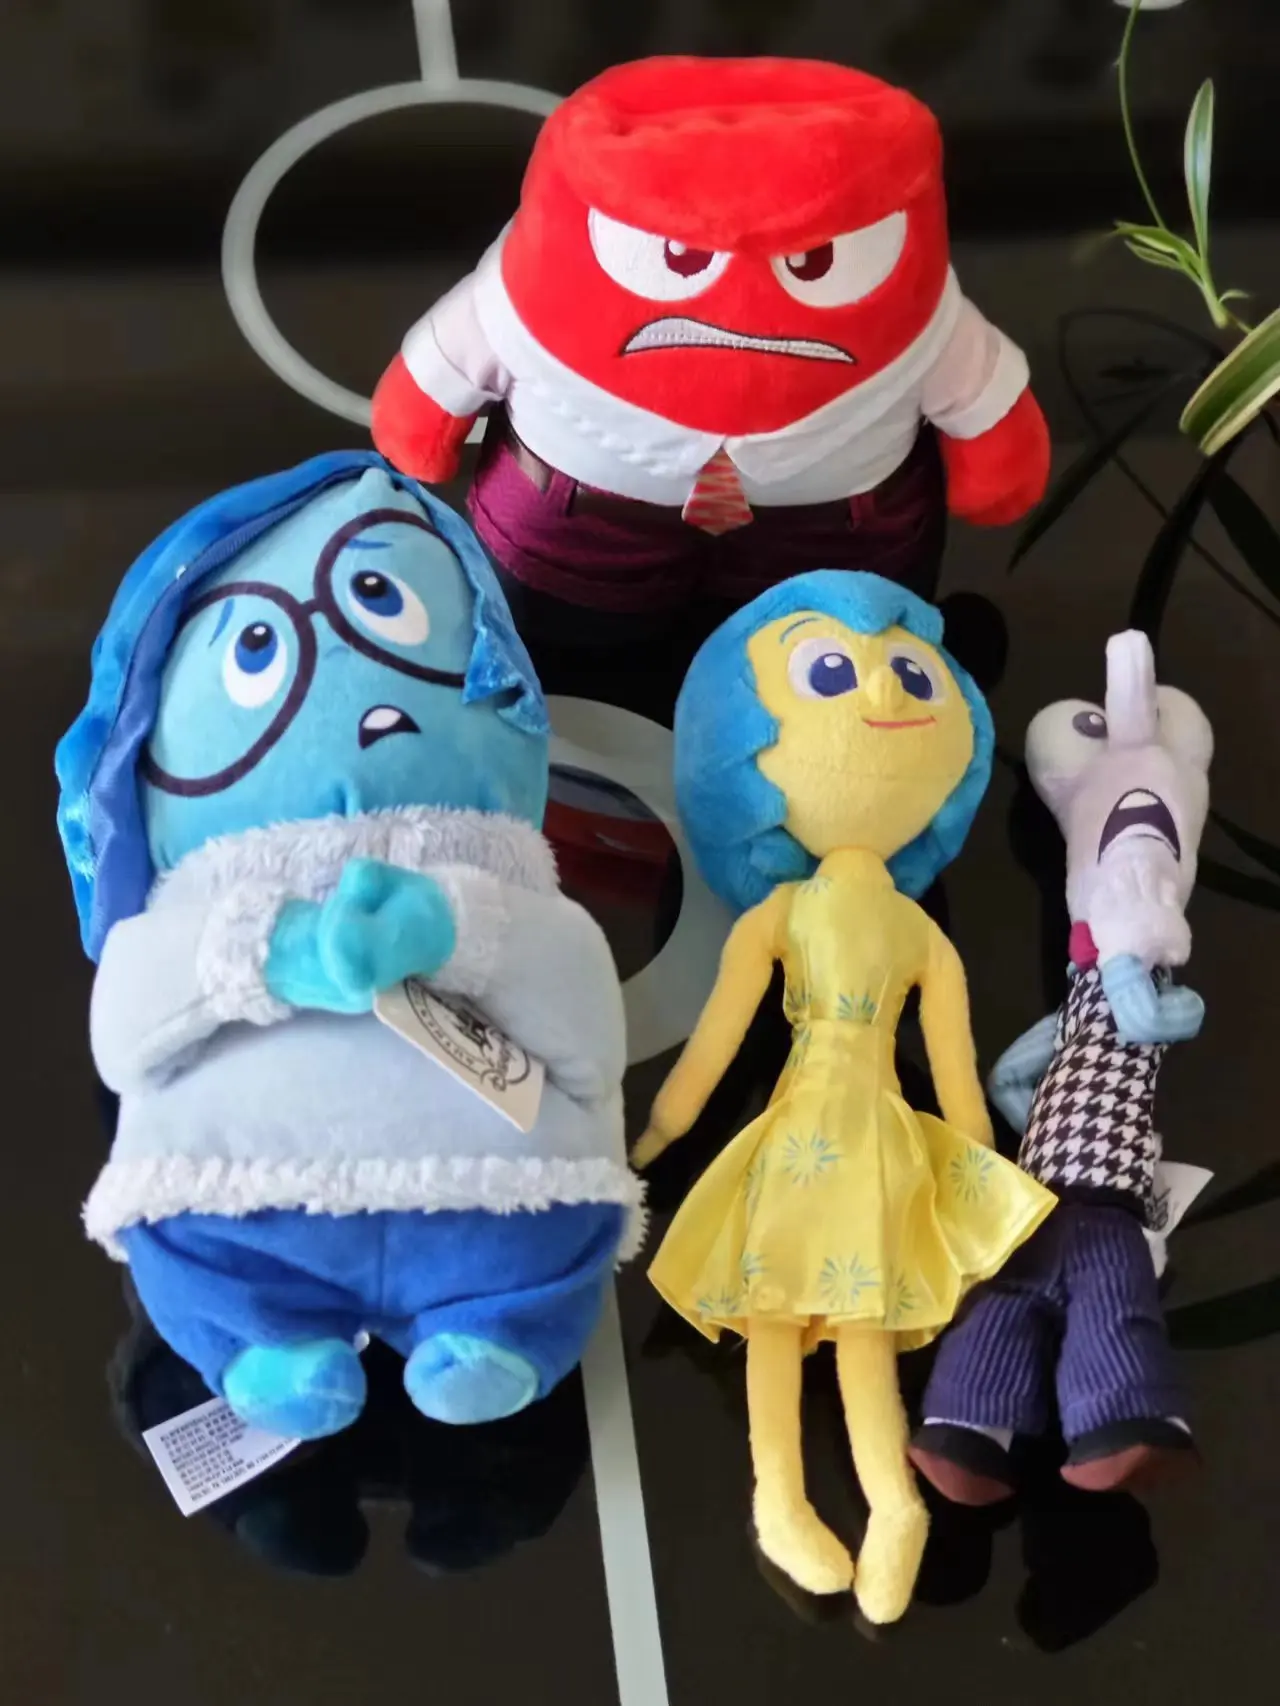 disney-movie-inside-out-cartoon-characters-bing-bong-joy-sadness-anger-disgust-fear-plush-toys-doll-gifts-for-children